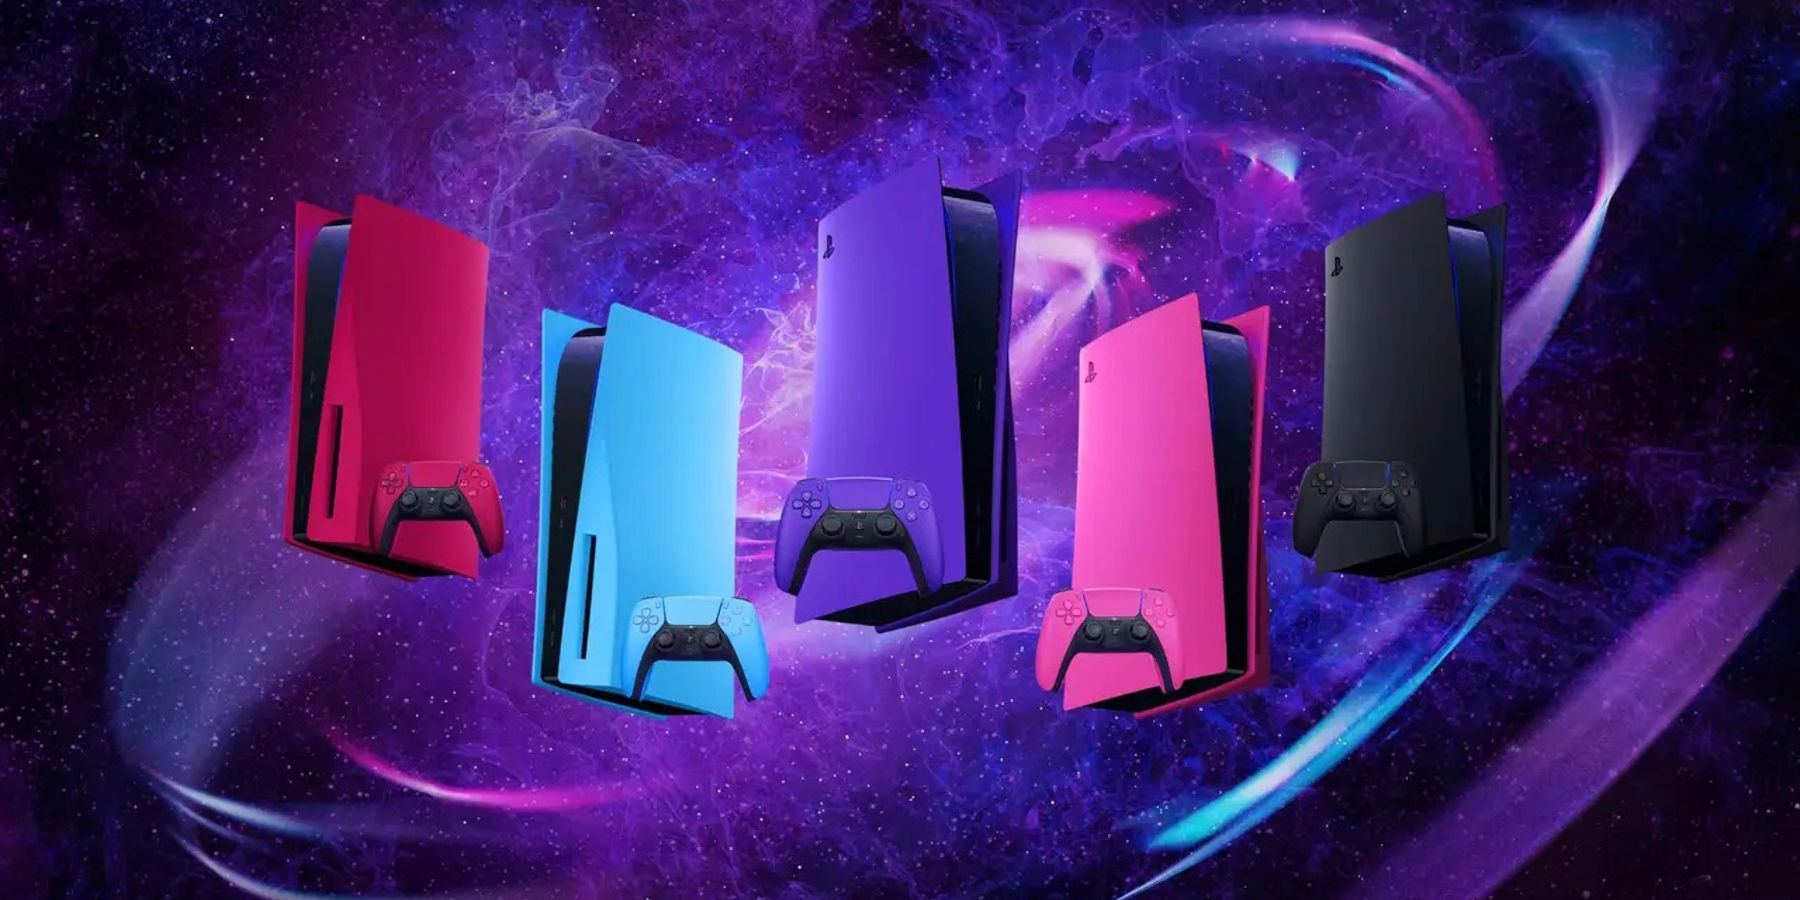 ps5's five console cover colors